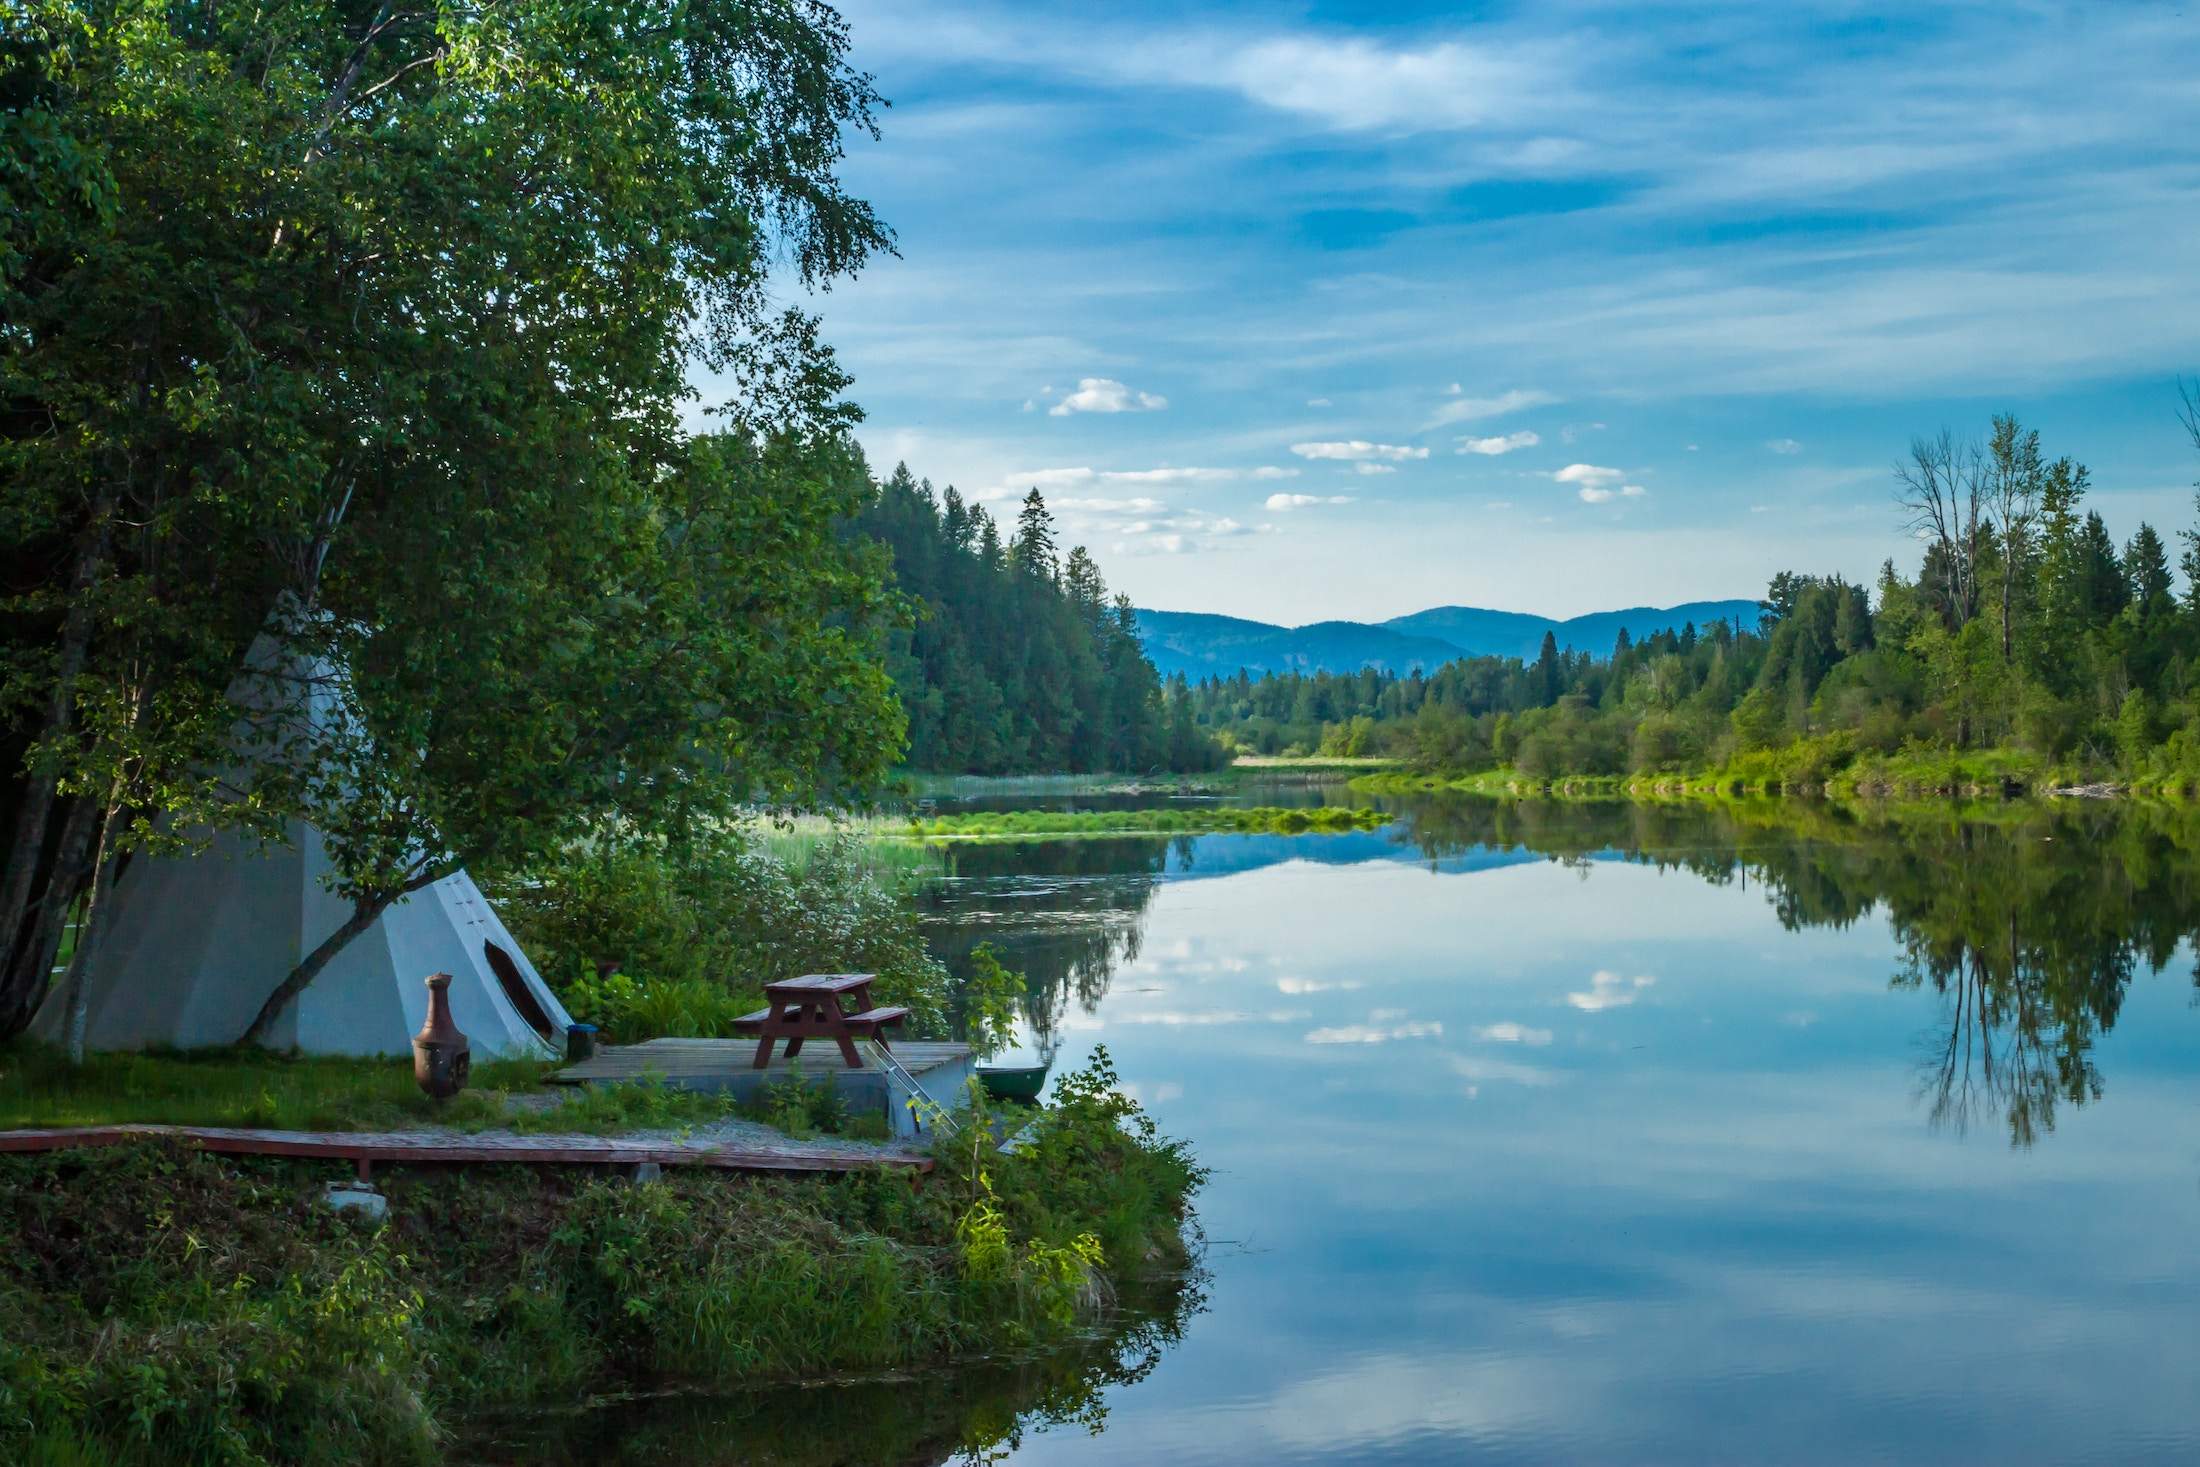 Why Host Glamping Accommodations On Outdoorsy Stays?